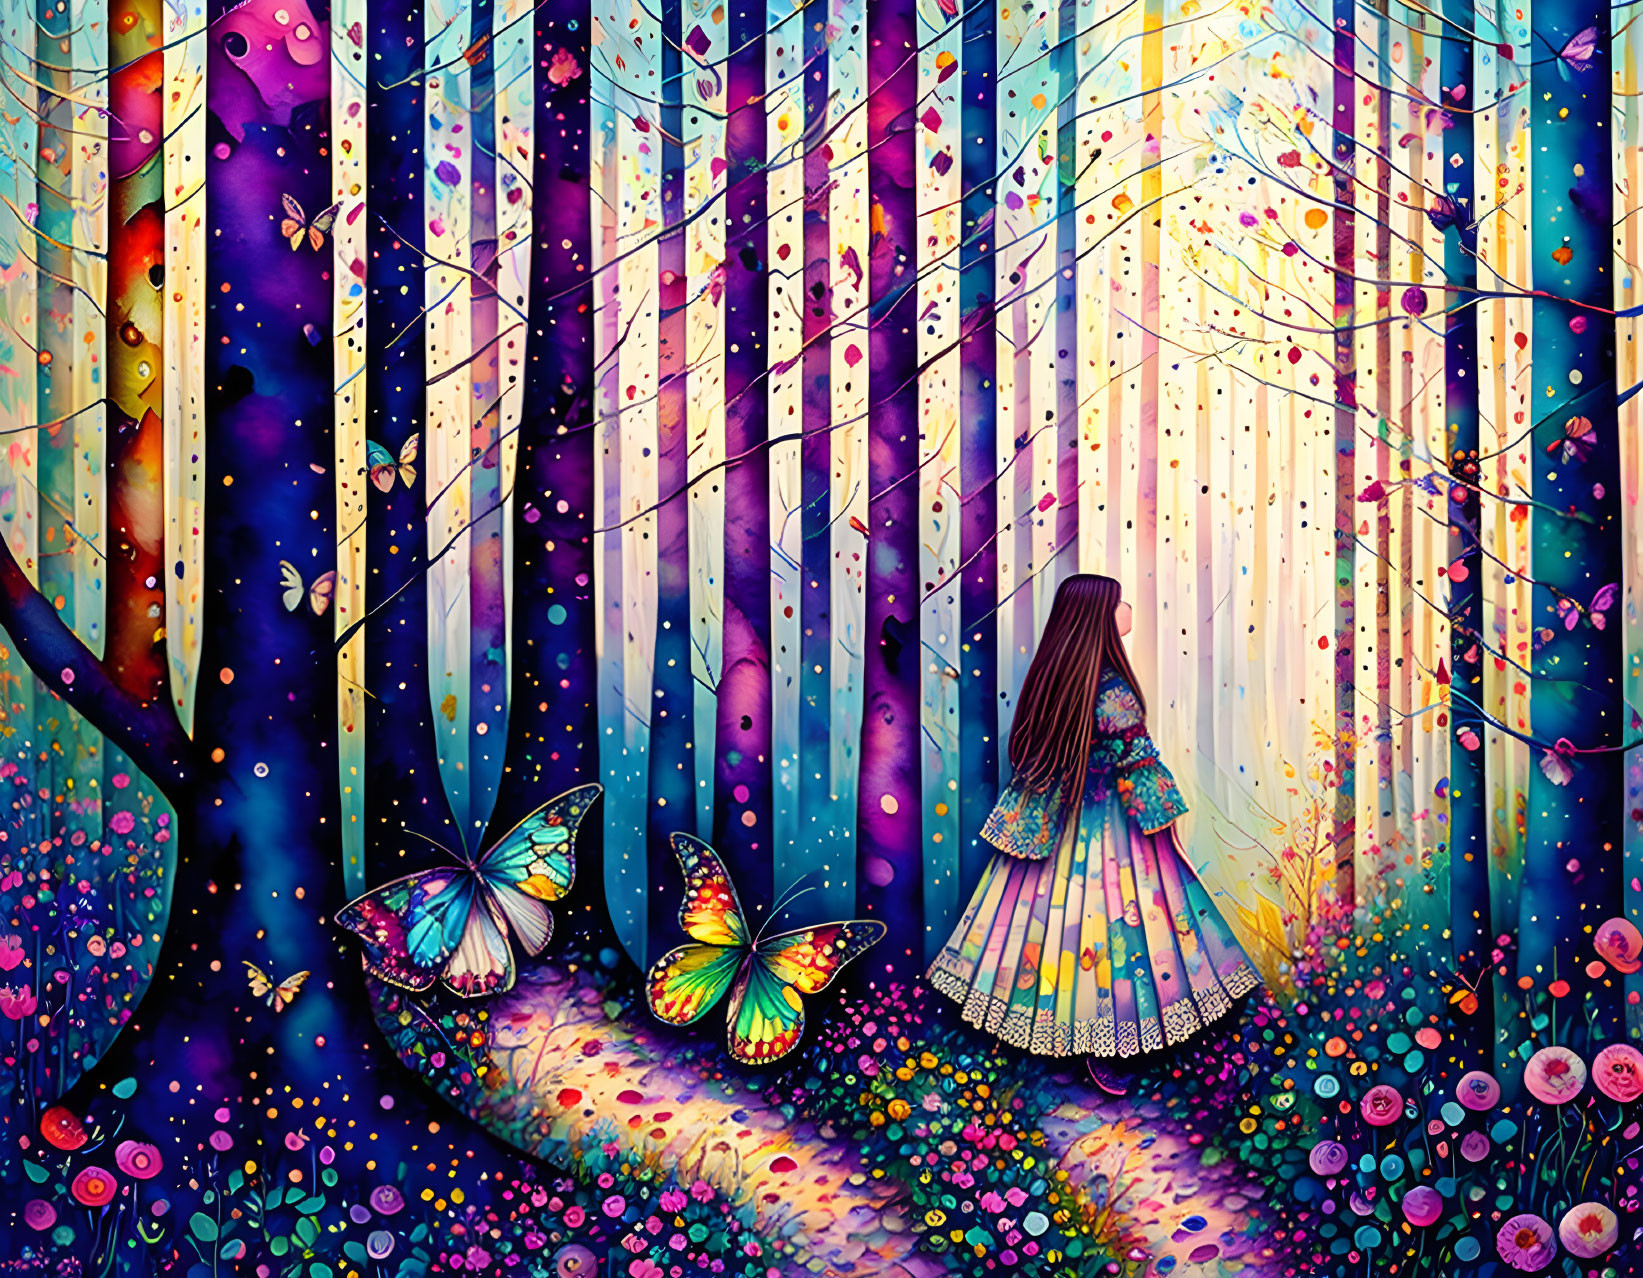 Colorful forest artwork featuring girl, vibrant trees, lights, oversized butterflies